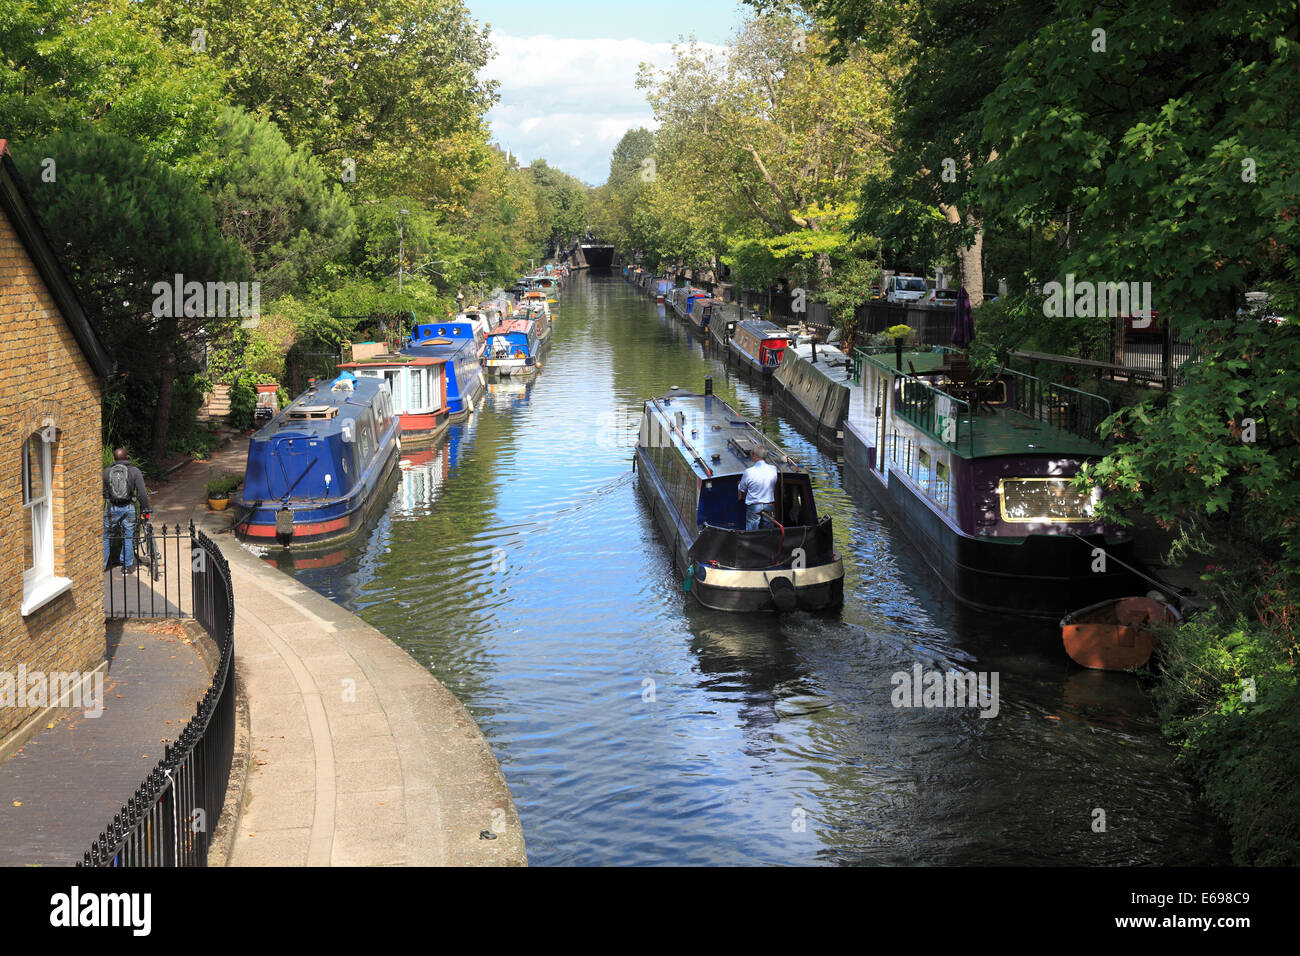 Regents Canal at 'Little Venice' in London Stock Photo